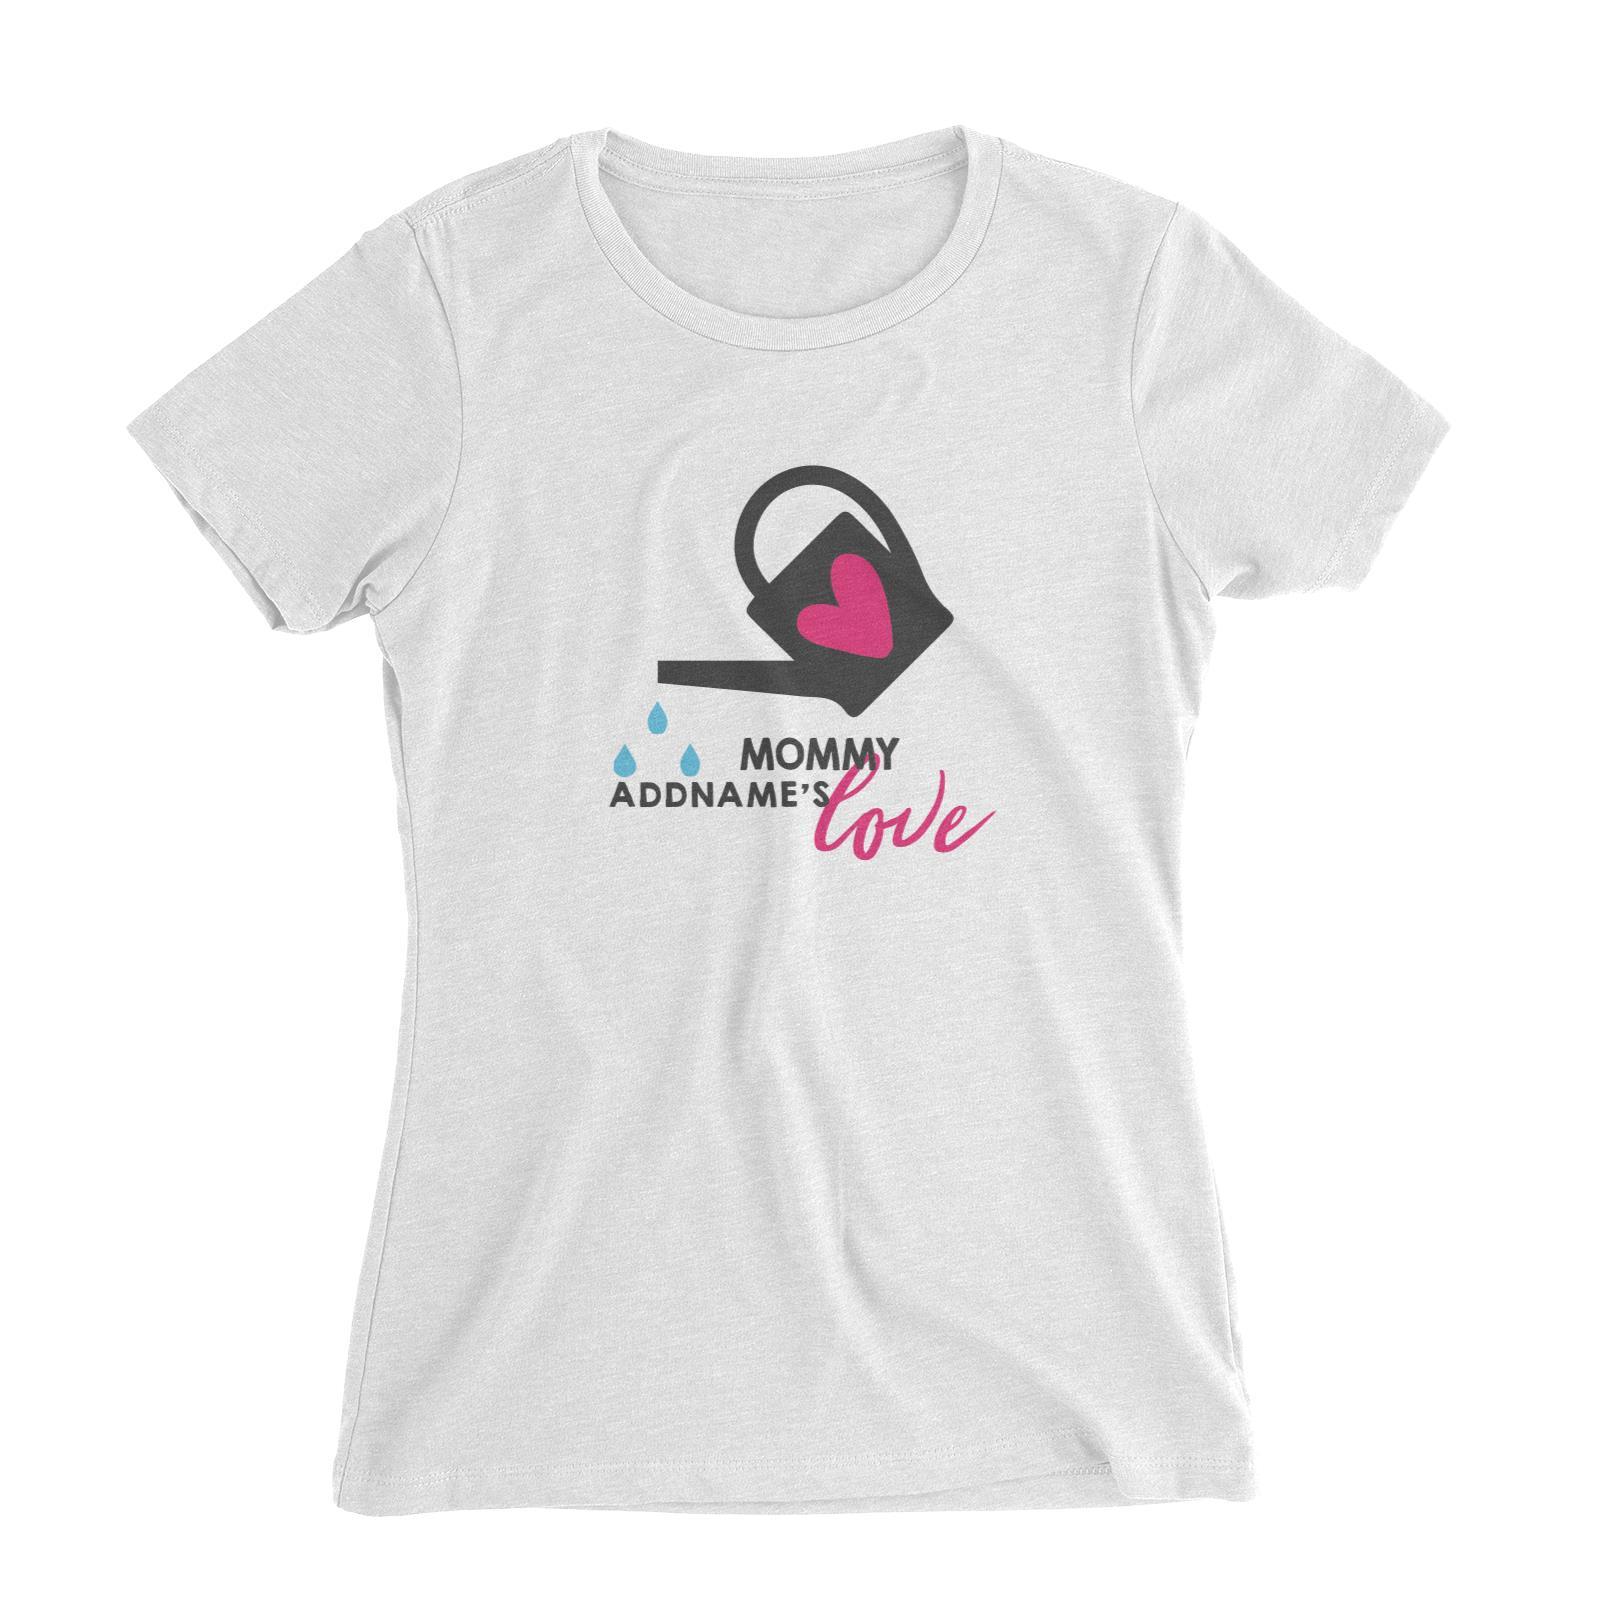 Nurturing Mommy's Love Addname Women's Slim Fit T-Shirt  Matching Family Personalizable Designs